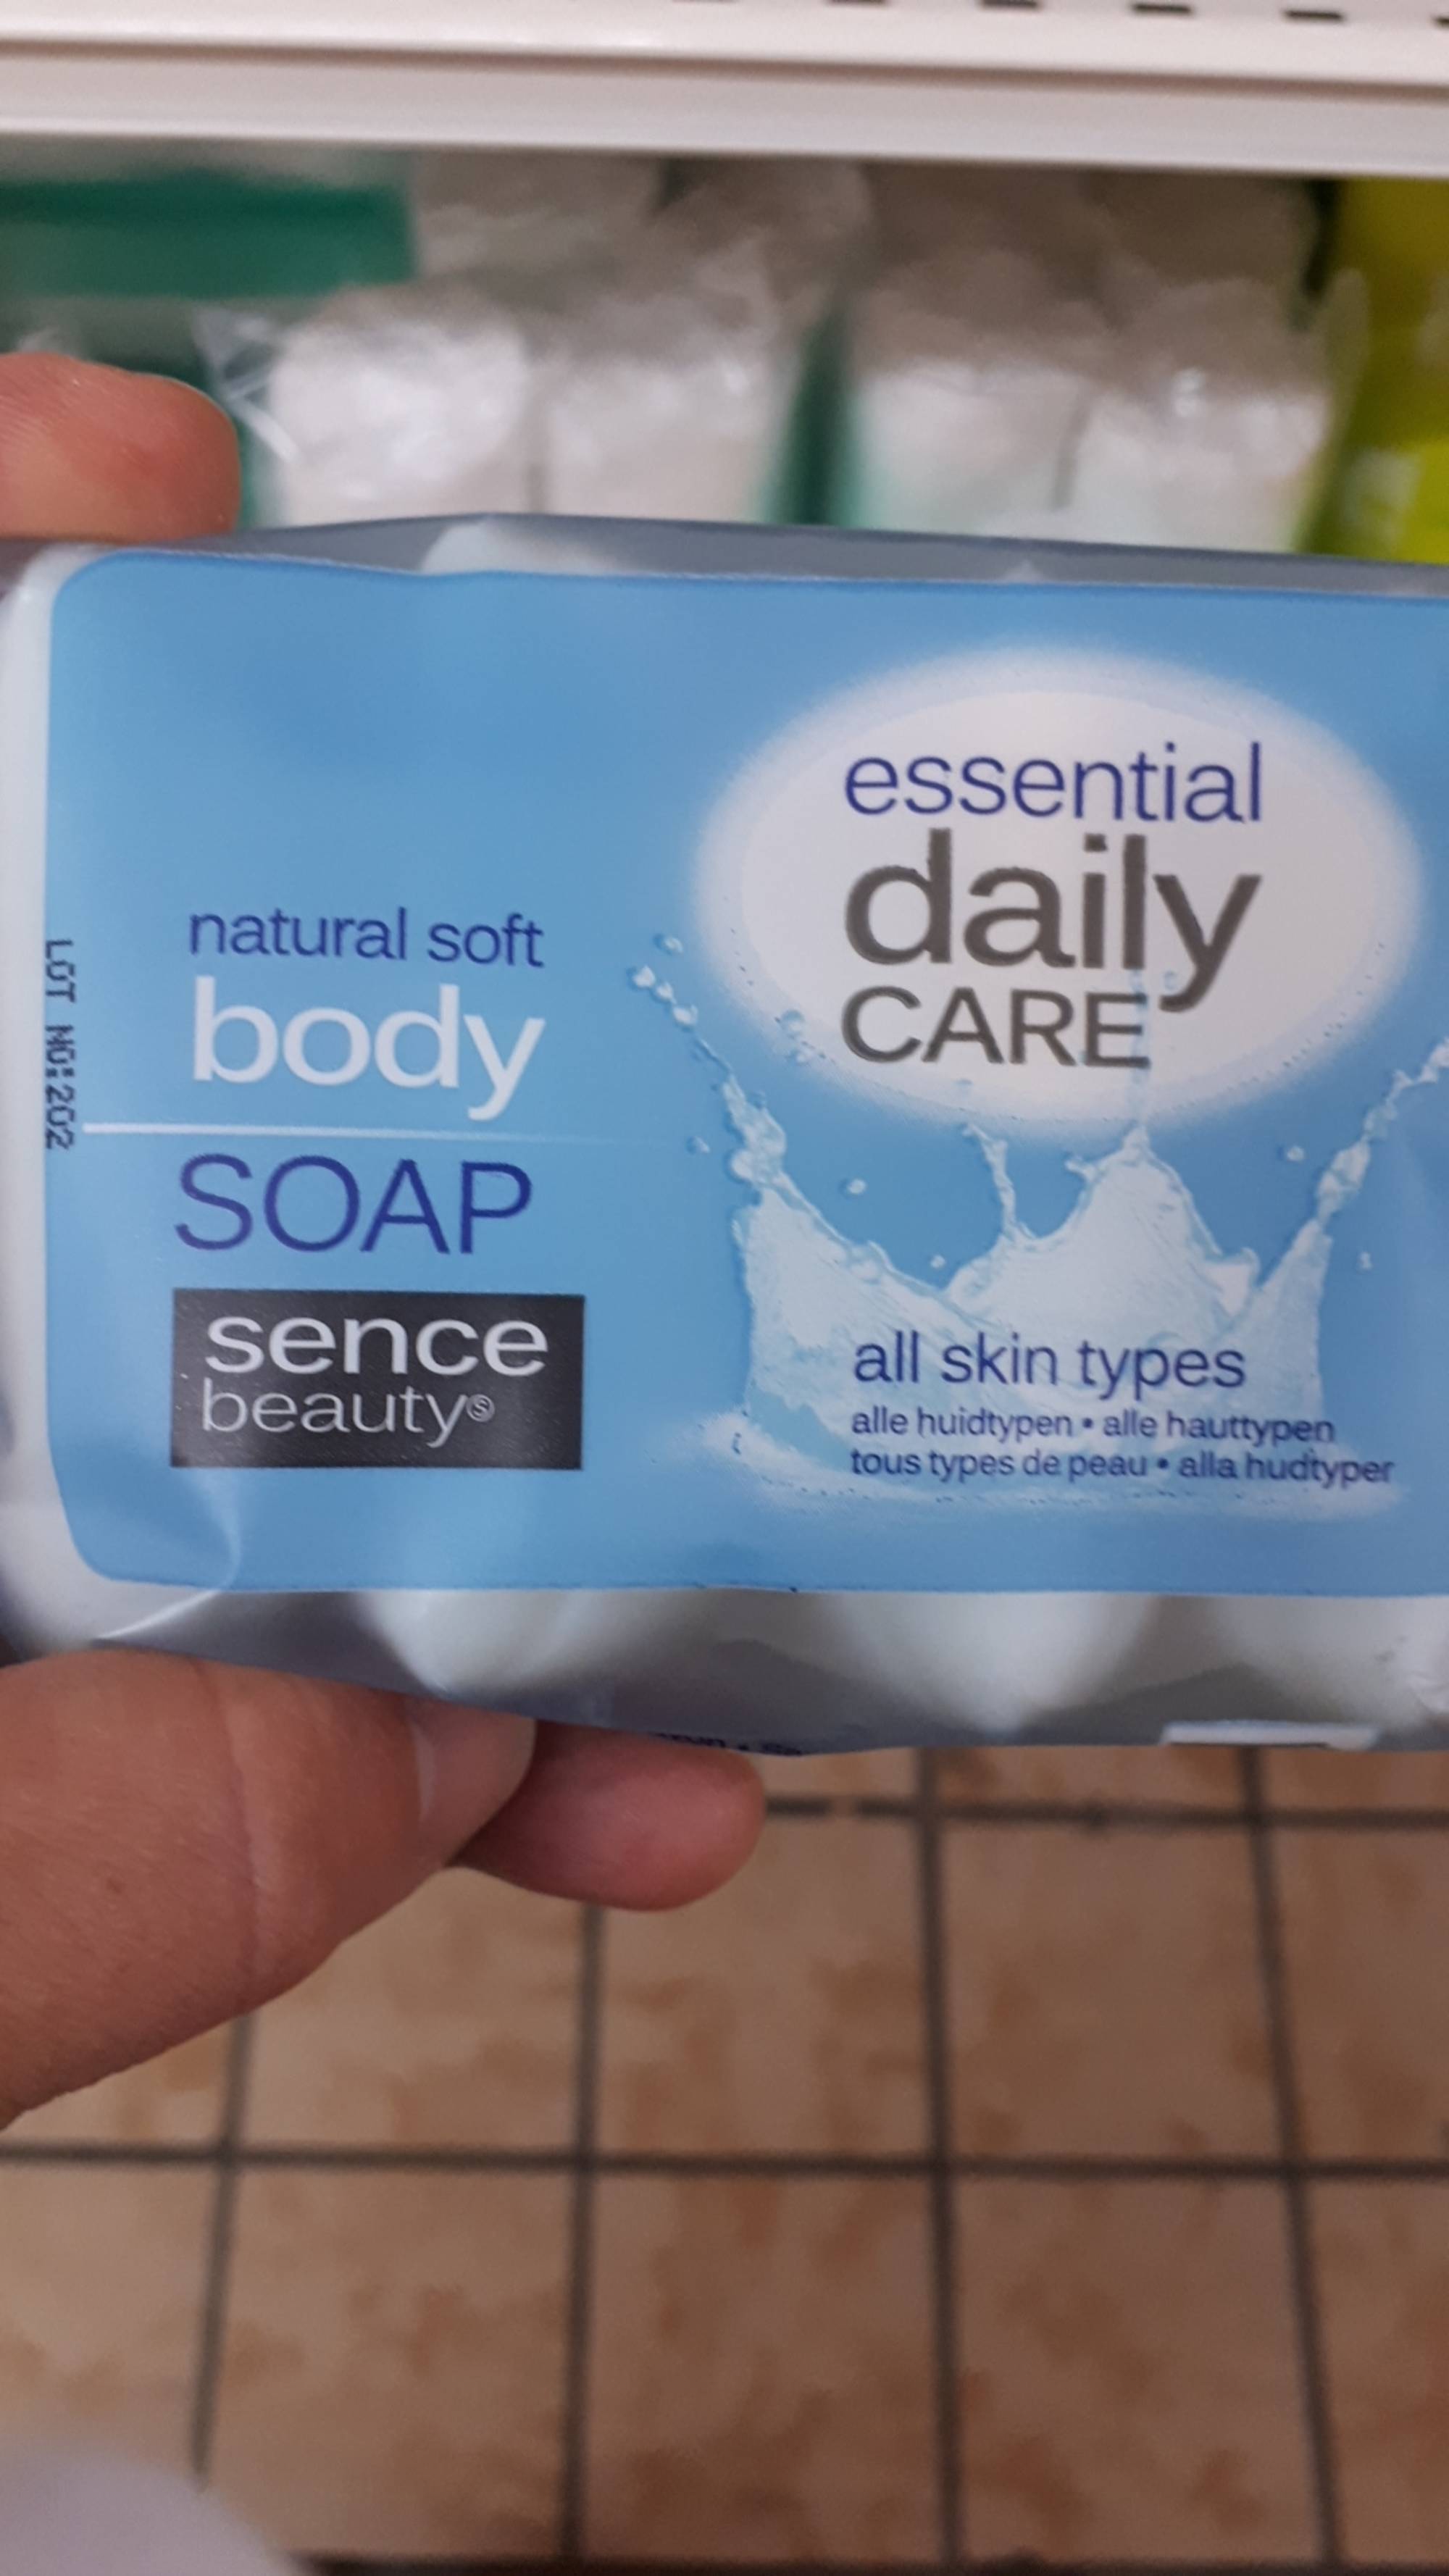 SENCE BEAUTY - Essential daily care - Natural soft body soap